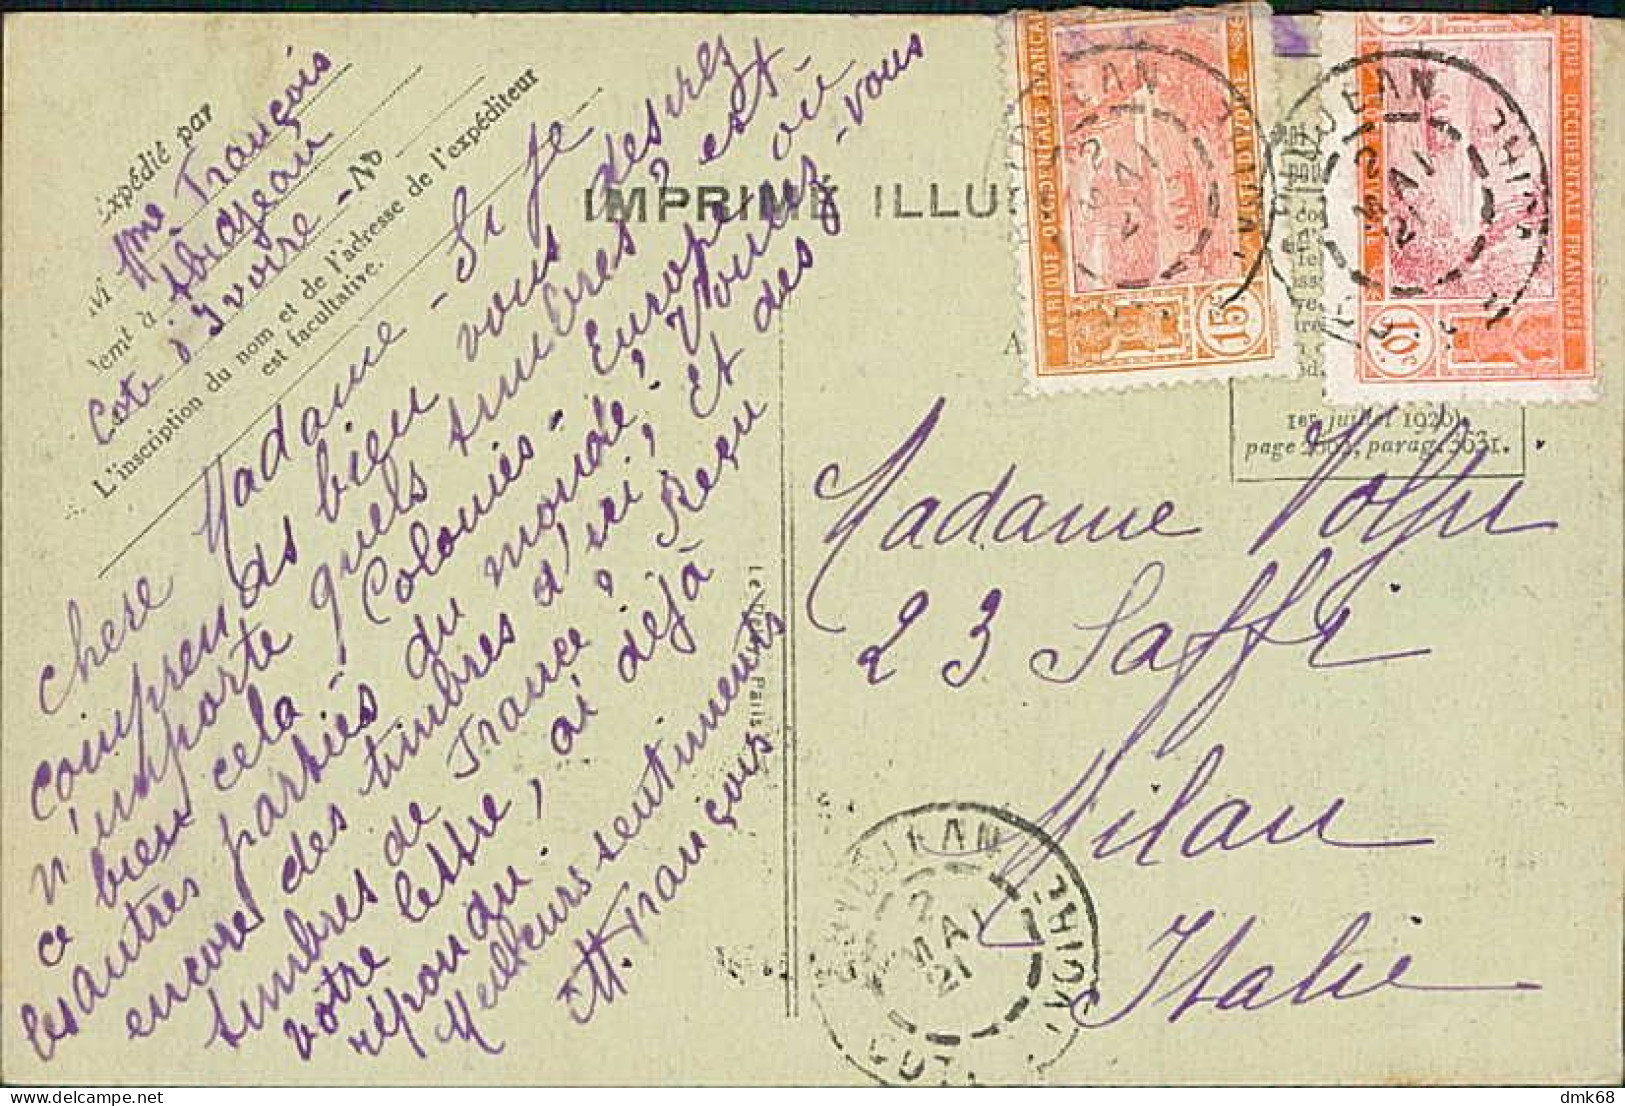 IVORY COAST / COTE D'IVOIRE -  GRAND-BASSAM LE LABORATOIRE - EDIT. METEYER - MAILED TO ITALY / STAMPS - 1921 (12571) - Costa De Marfil